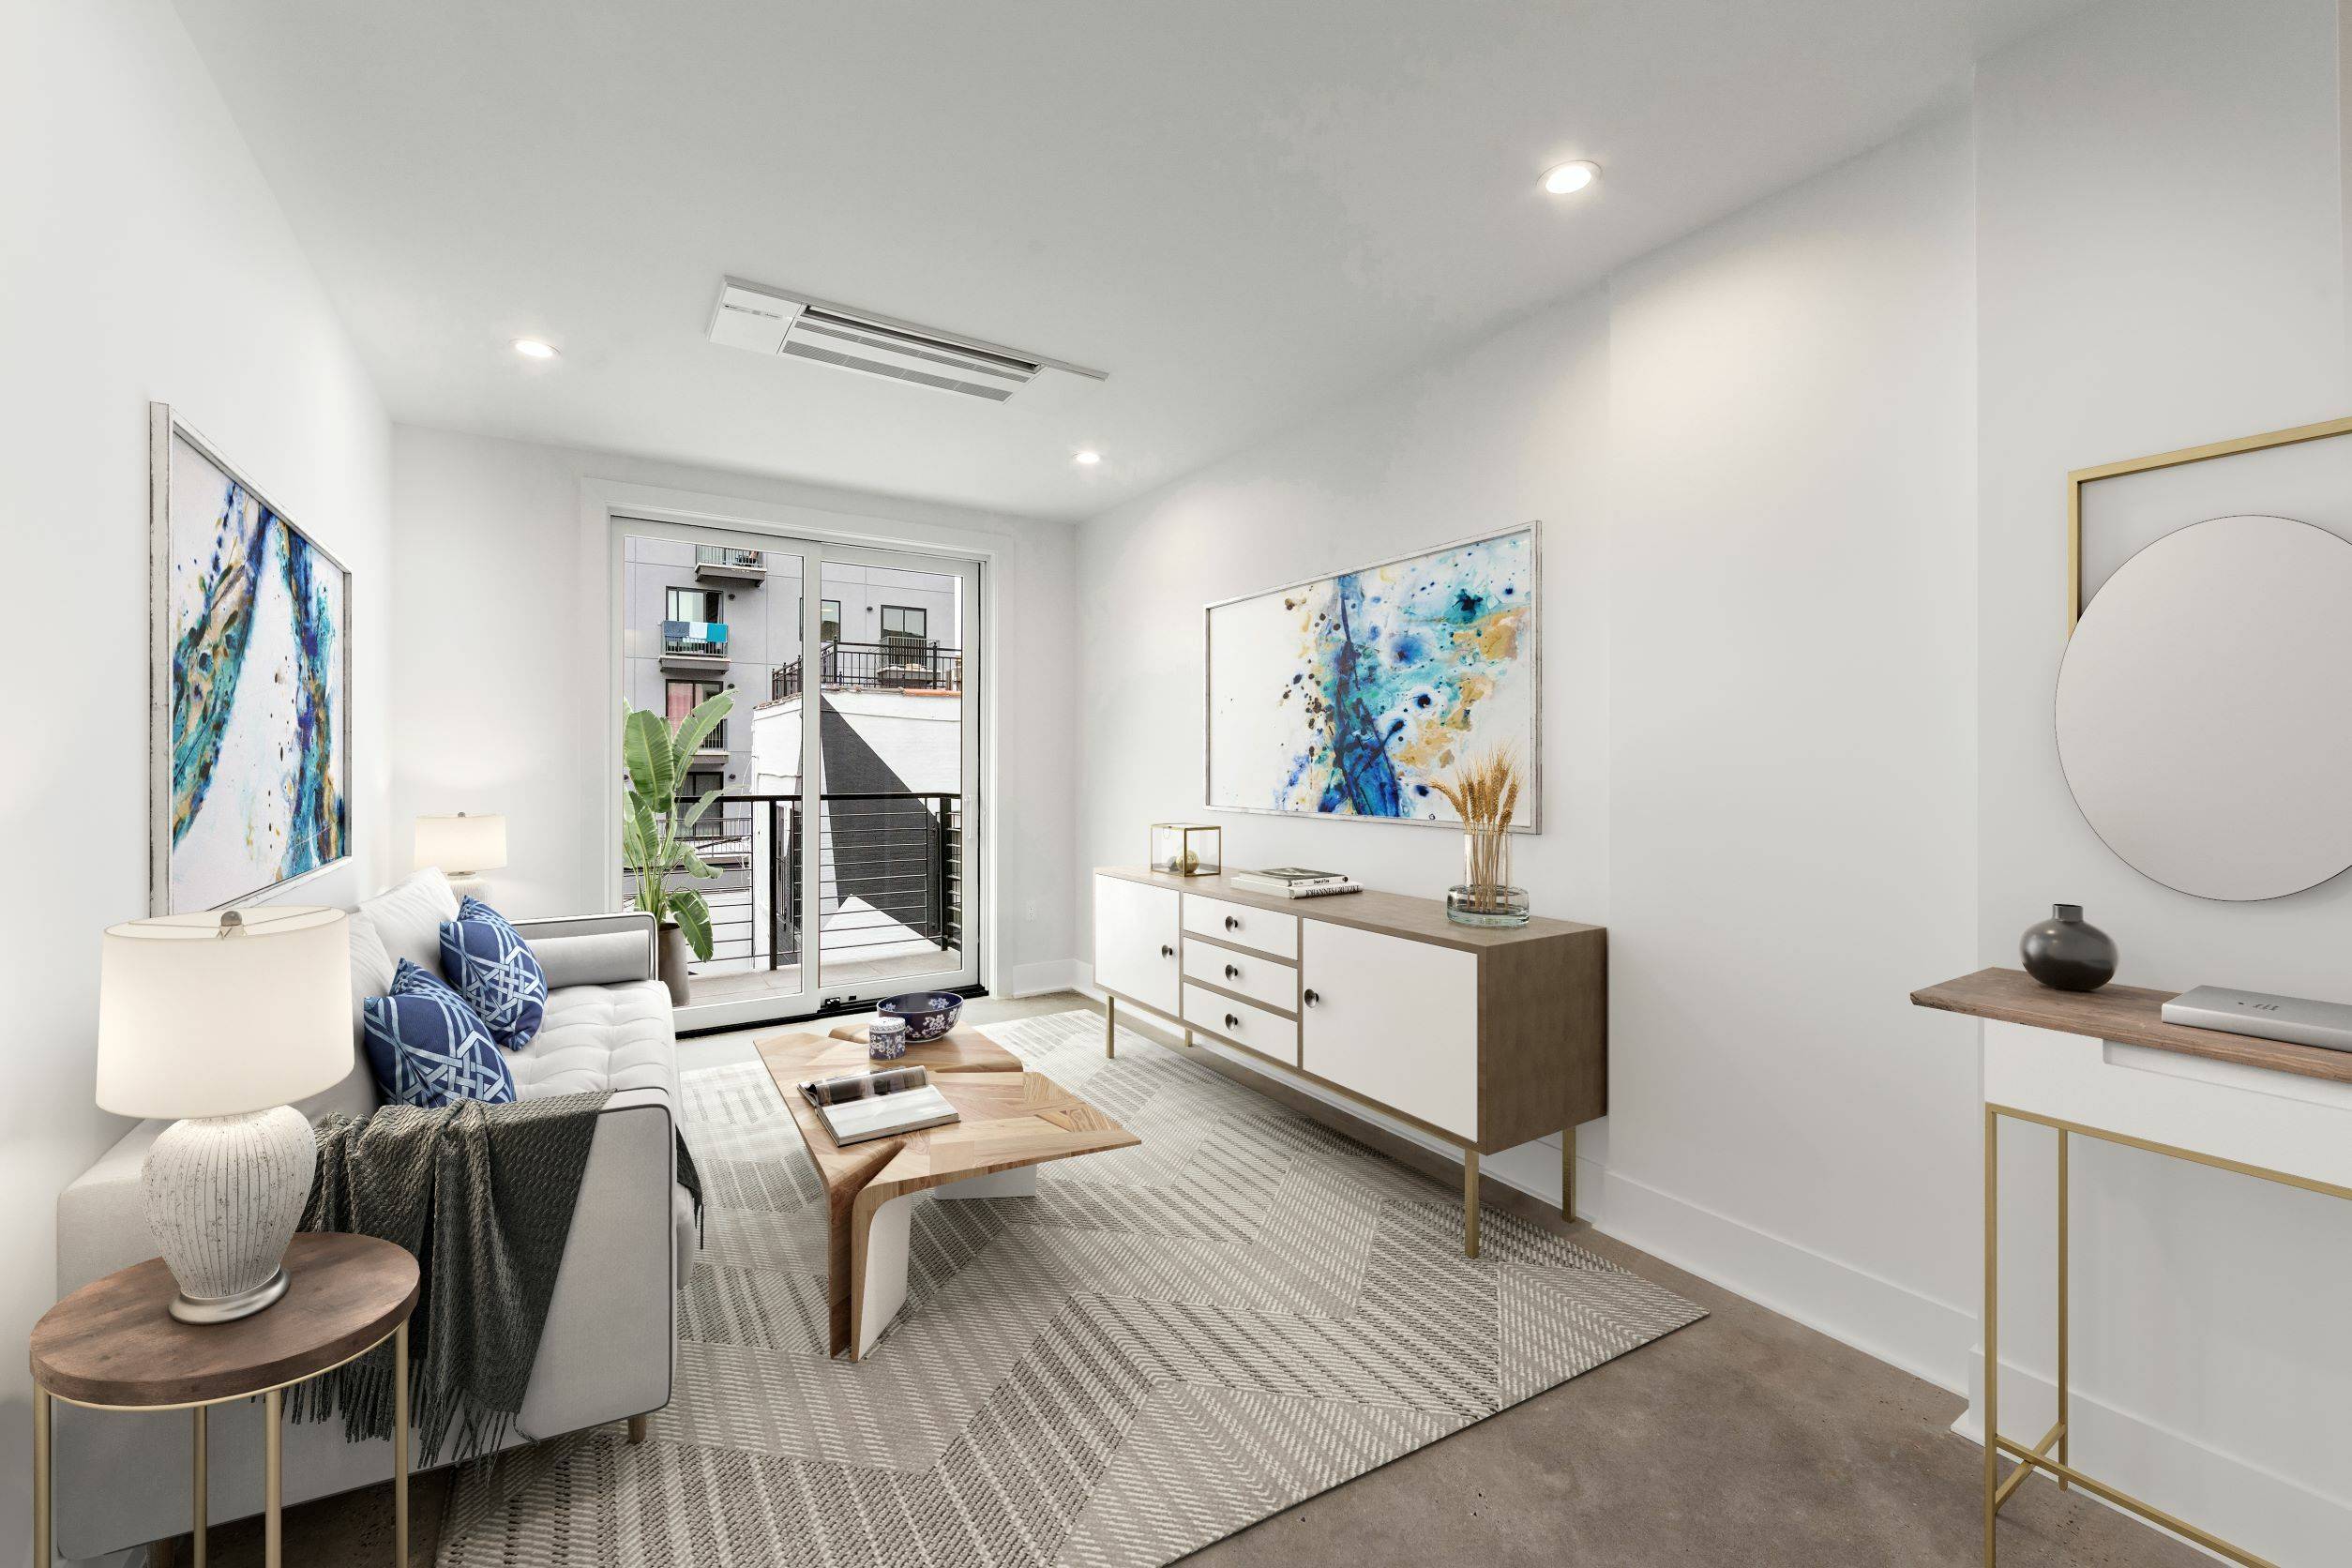 Introducing this brand new Bushwick condominium suffused with natural light, a chic 1 bedroom, 1 bathroom home graced with statement finishes that exude luxury and style.